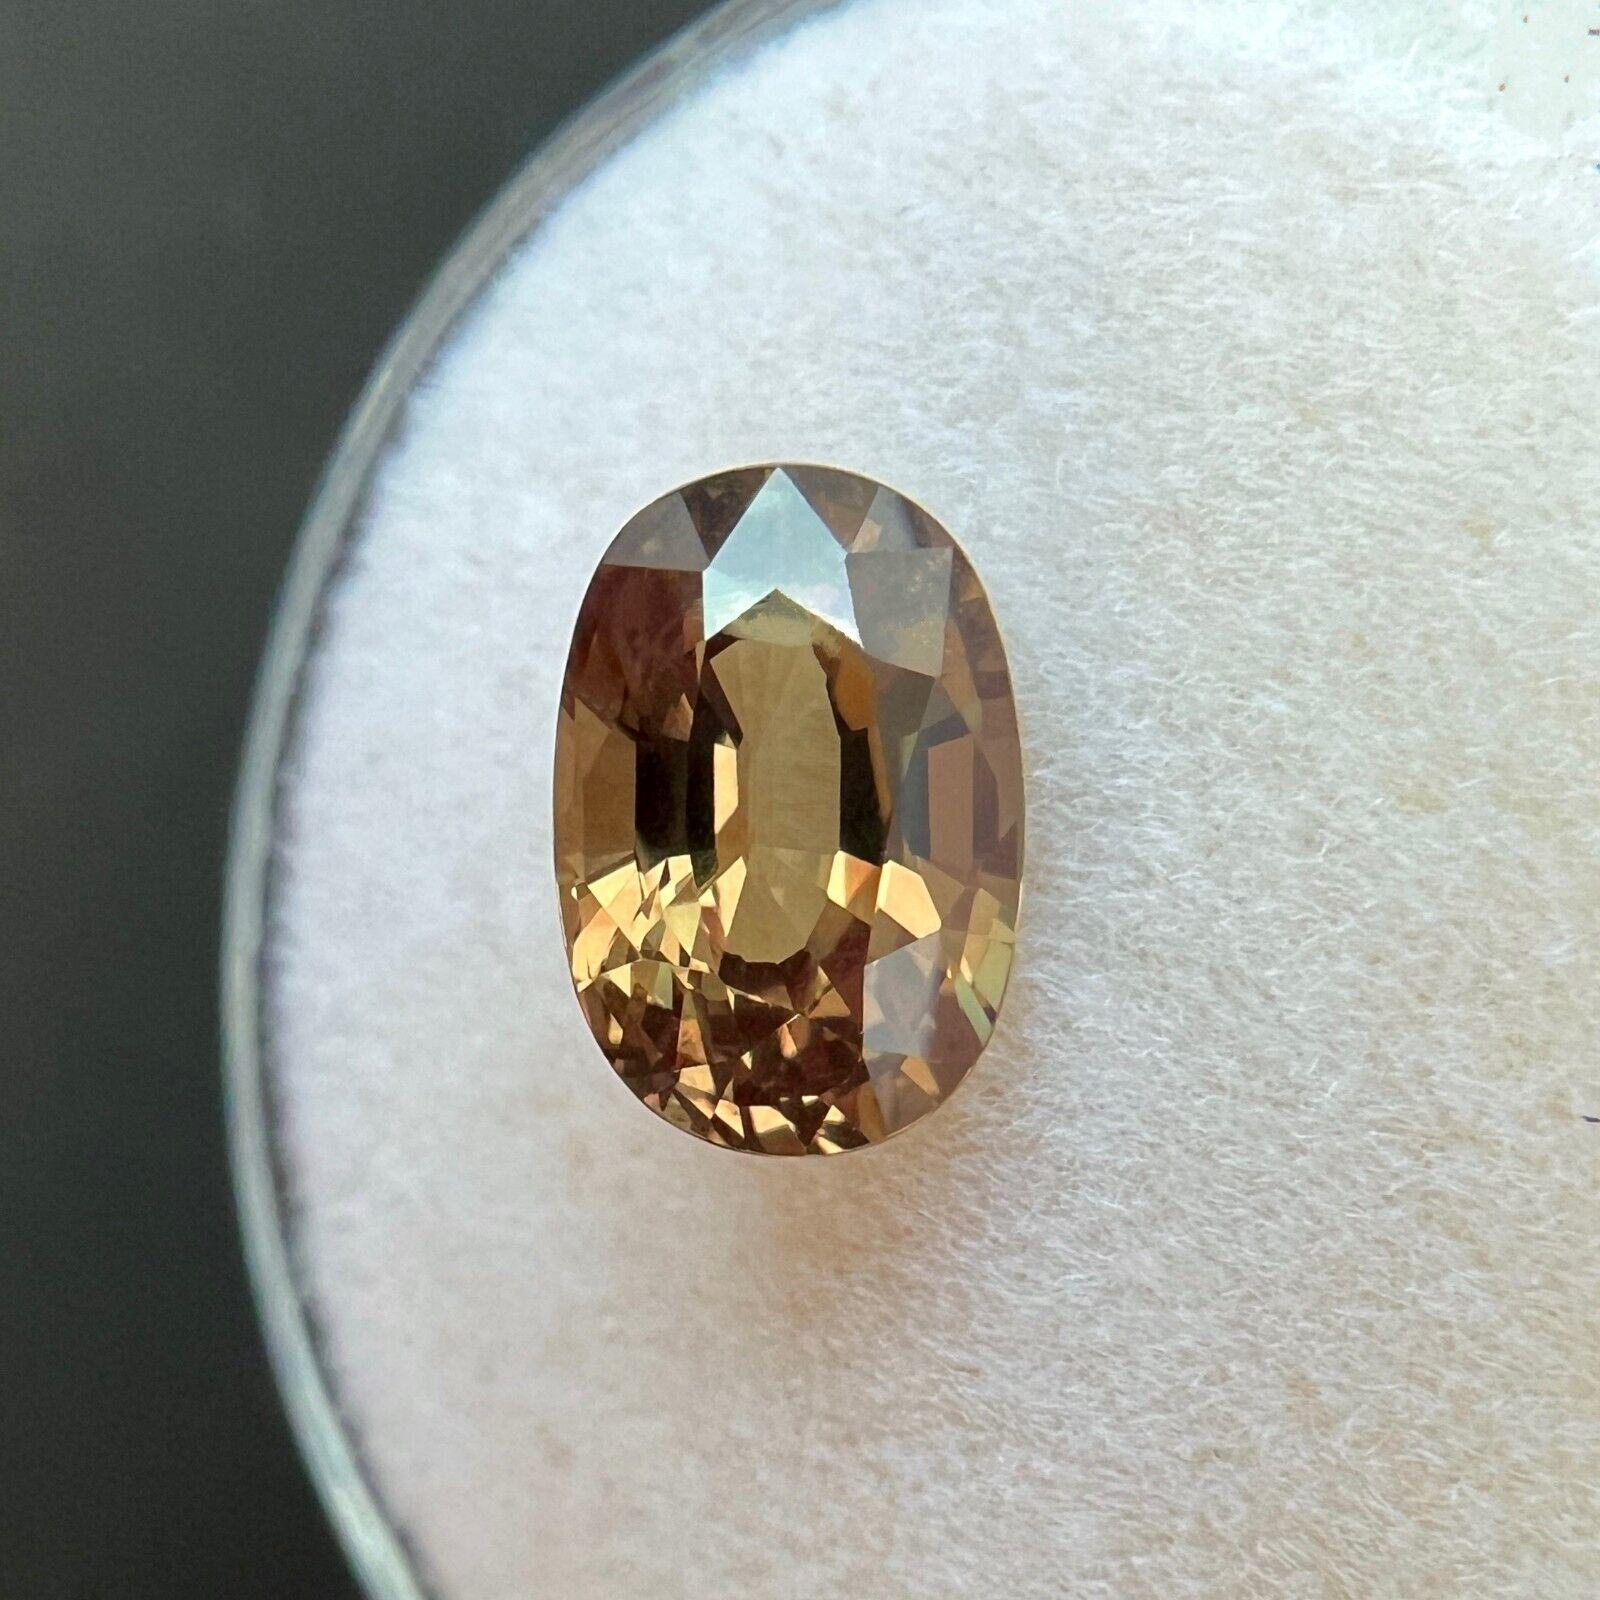 2.15ct Natural Colour Change Garnet GIA Certified Untreated Pyrope Spessartine

Rare Untreated Colour Change Garnet Gemstone.
2.15 Carat garnet with a rare colour change effect. Changing colour depending on the light its viewed in. Very rare for